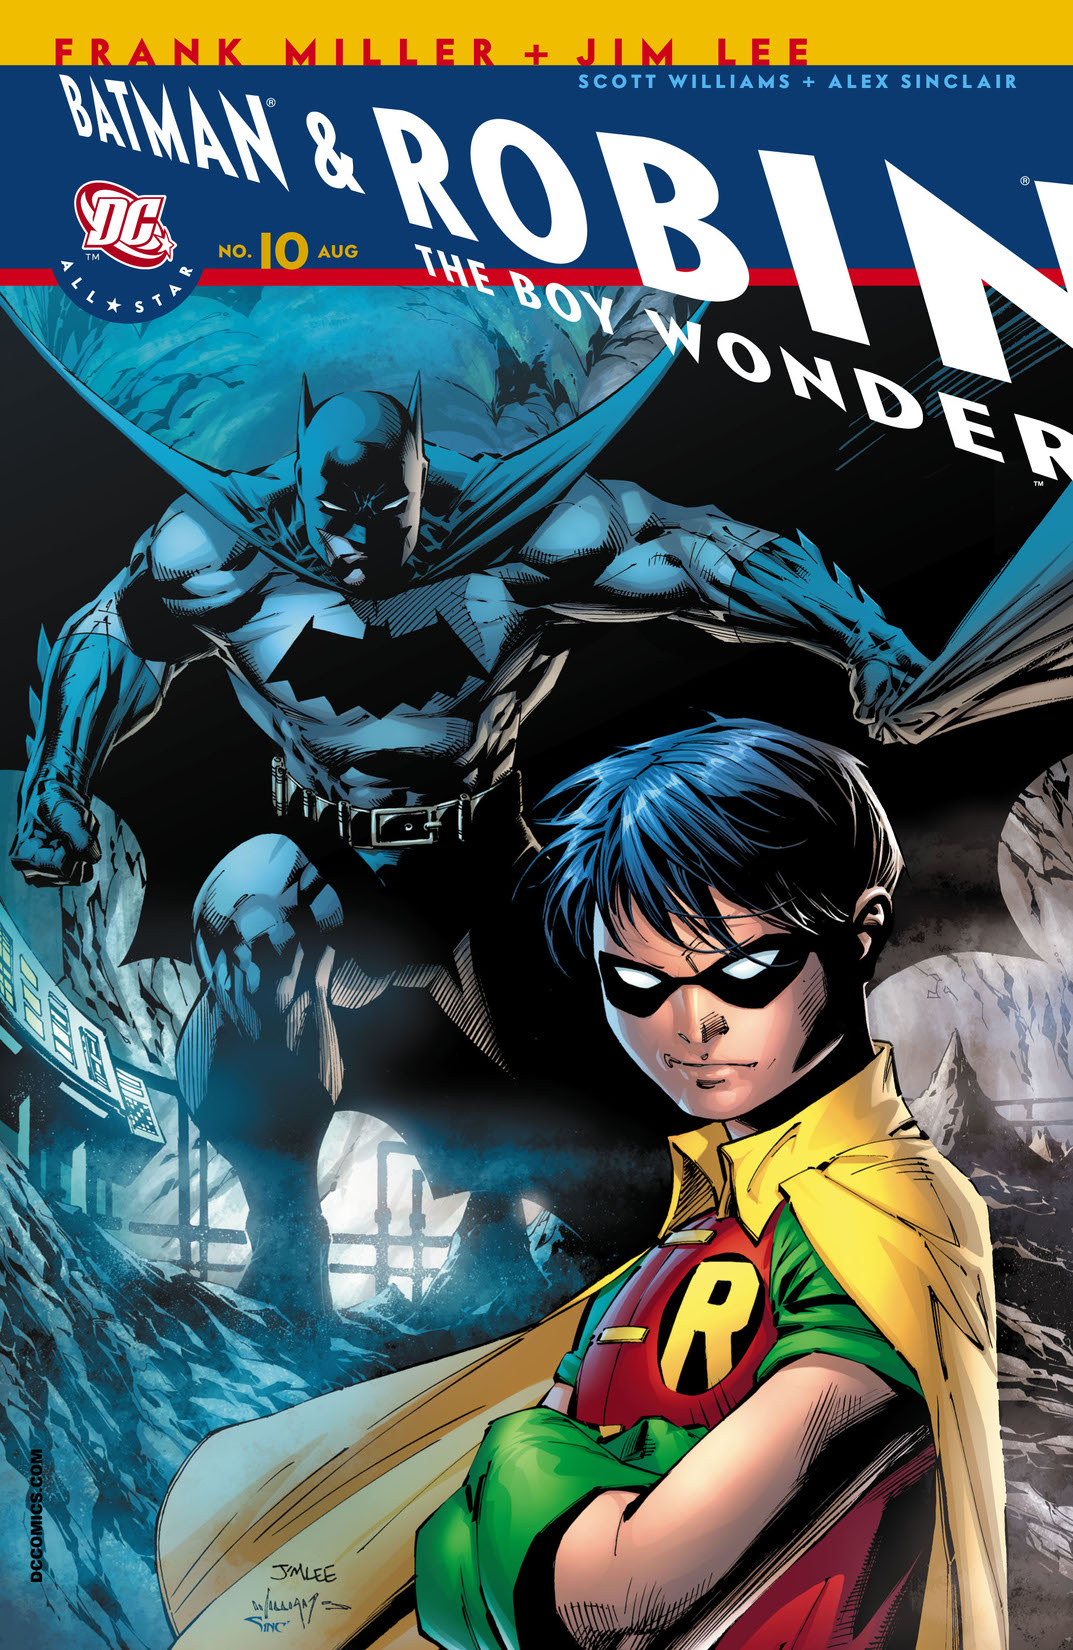 All-Star Batman & Robin, The Boy Wonder #10 preview images